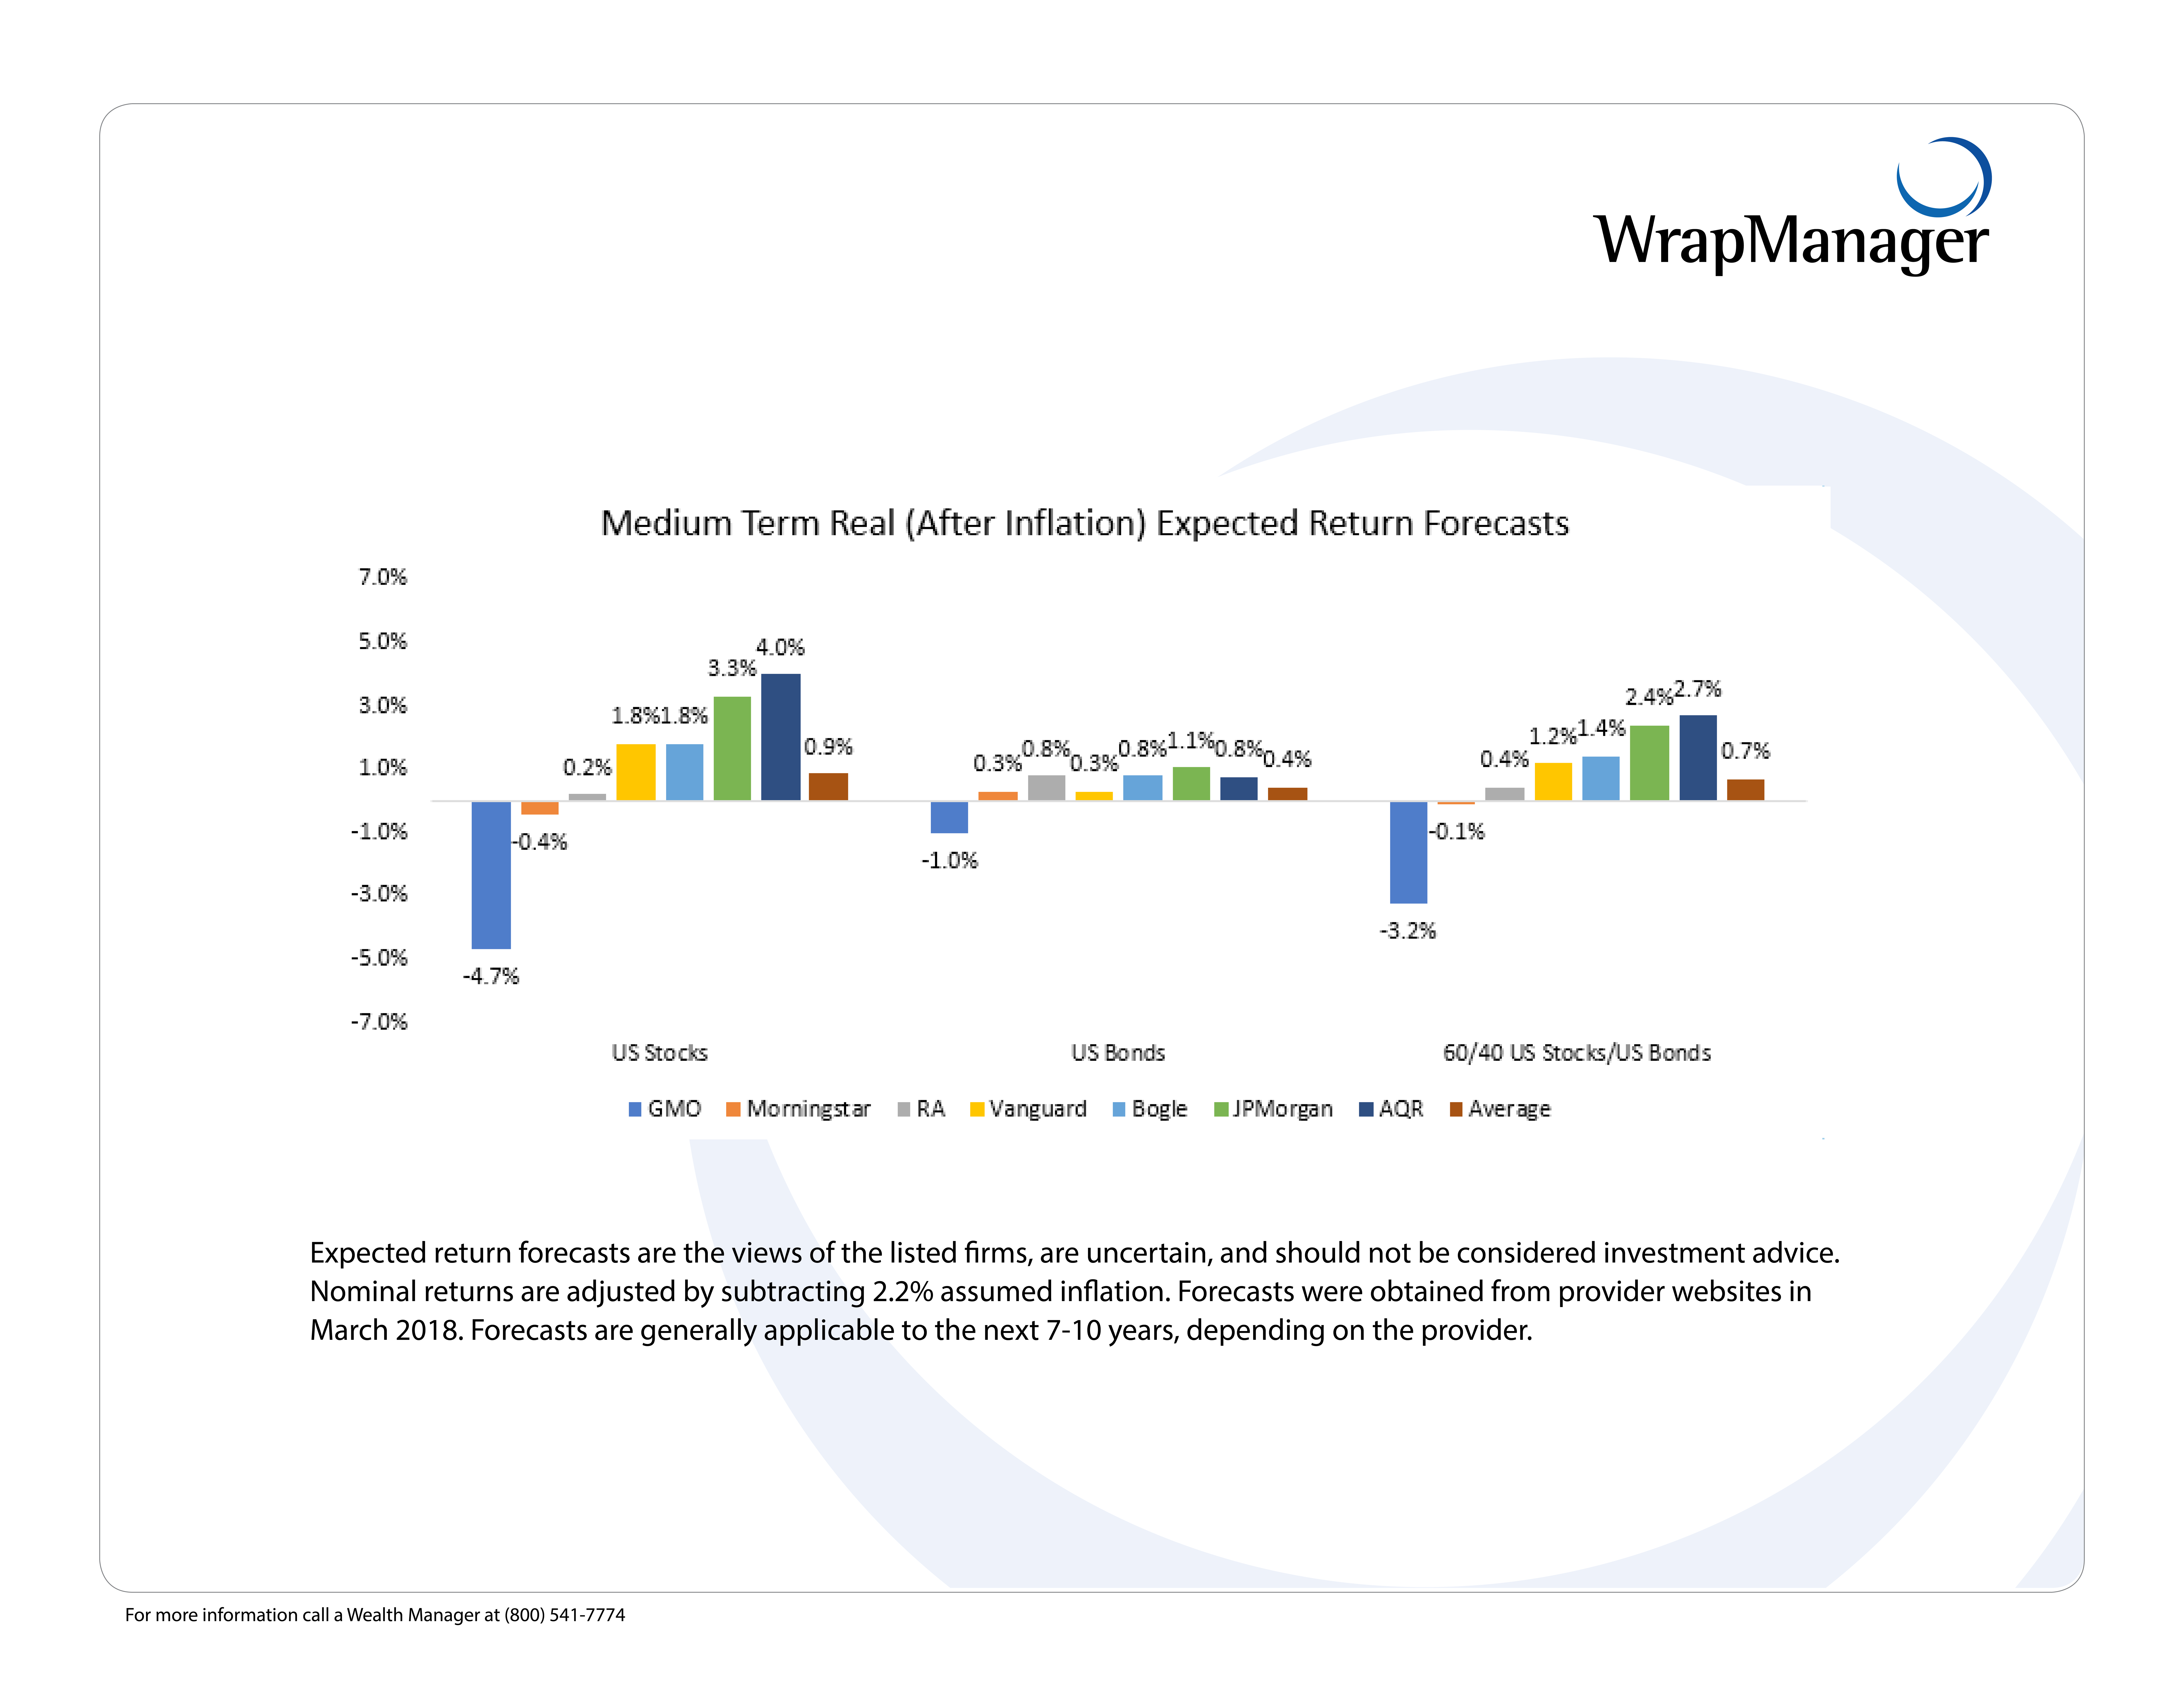 Medium Term Real Expected Return Forecasts - Newfound Research